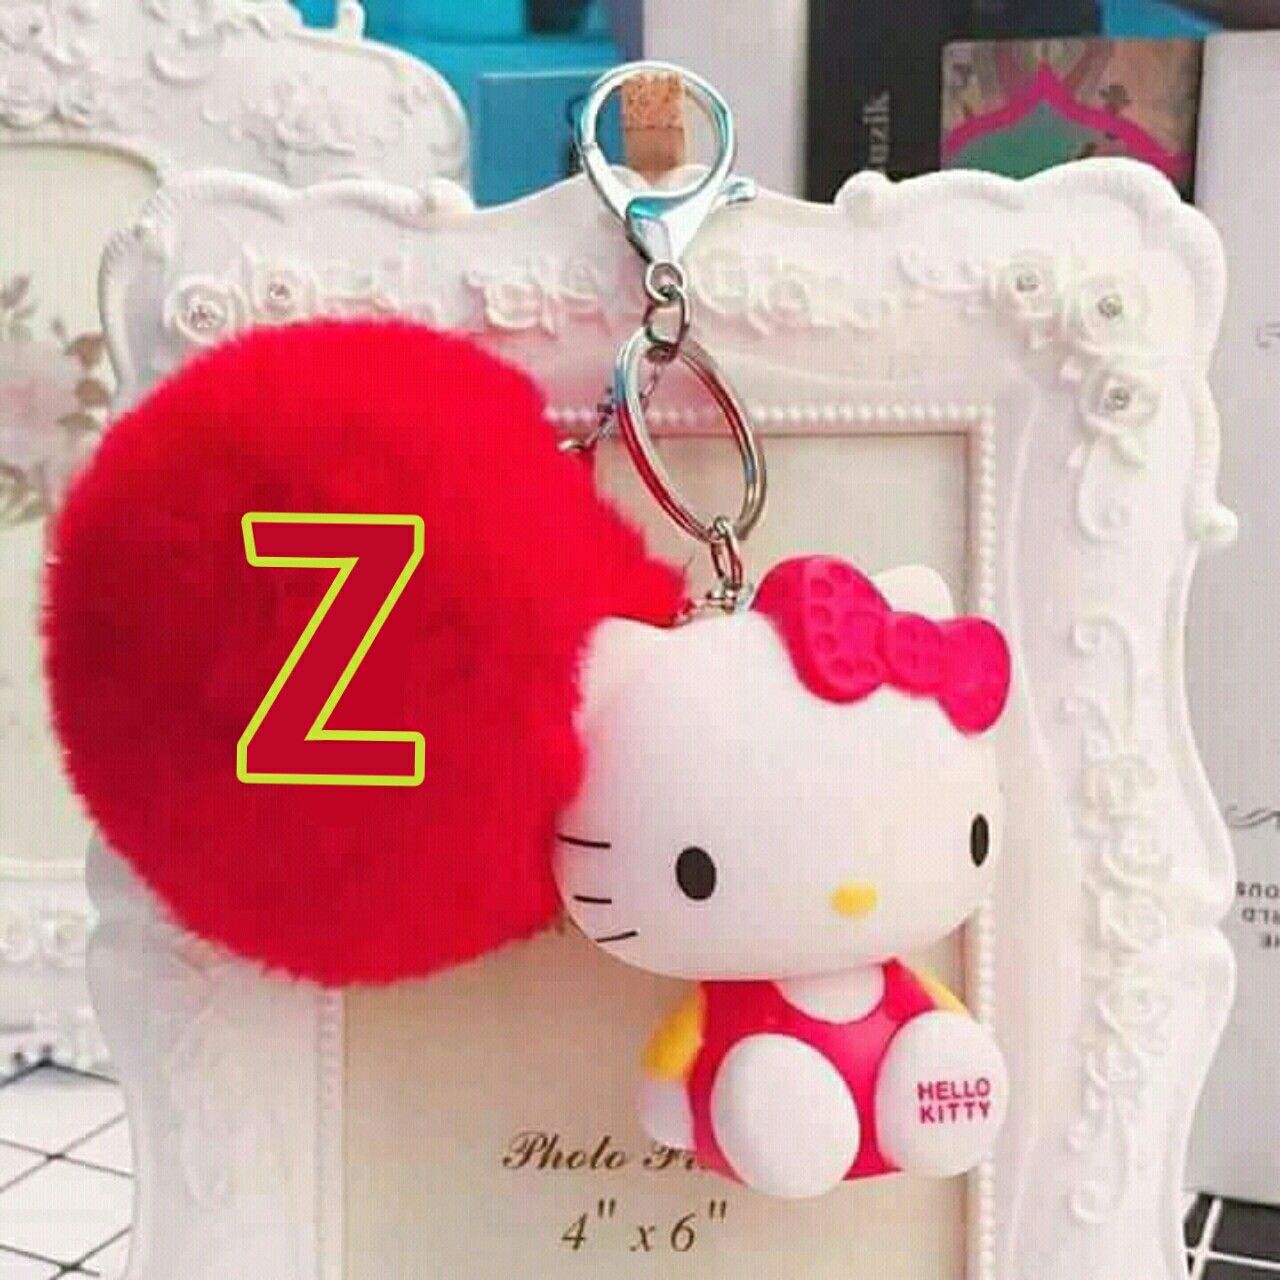 wallpaper name a to z,keychain,pink,heart,stuffed toy,fashion accessory